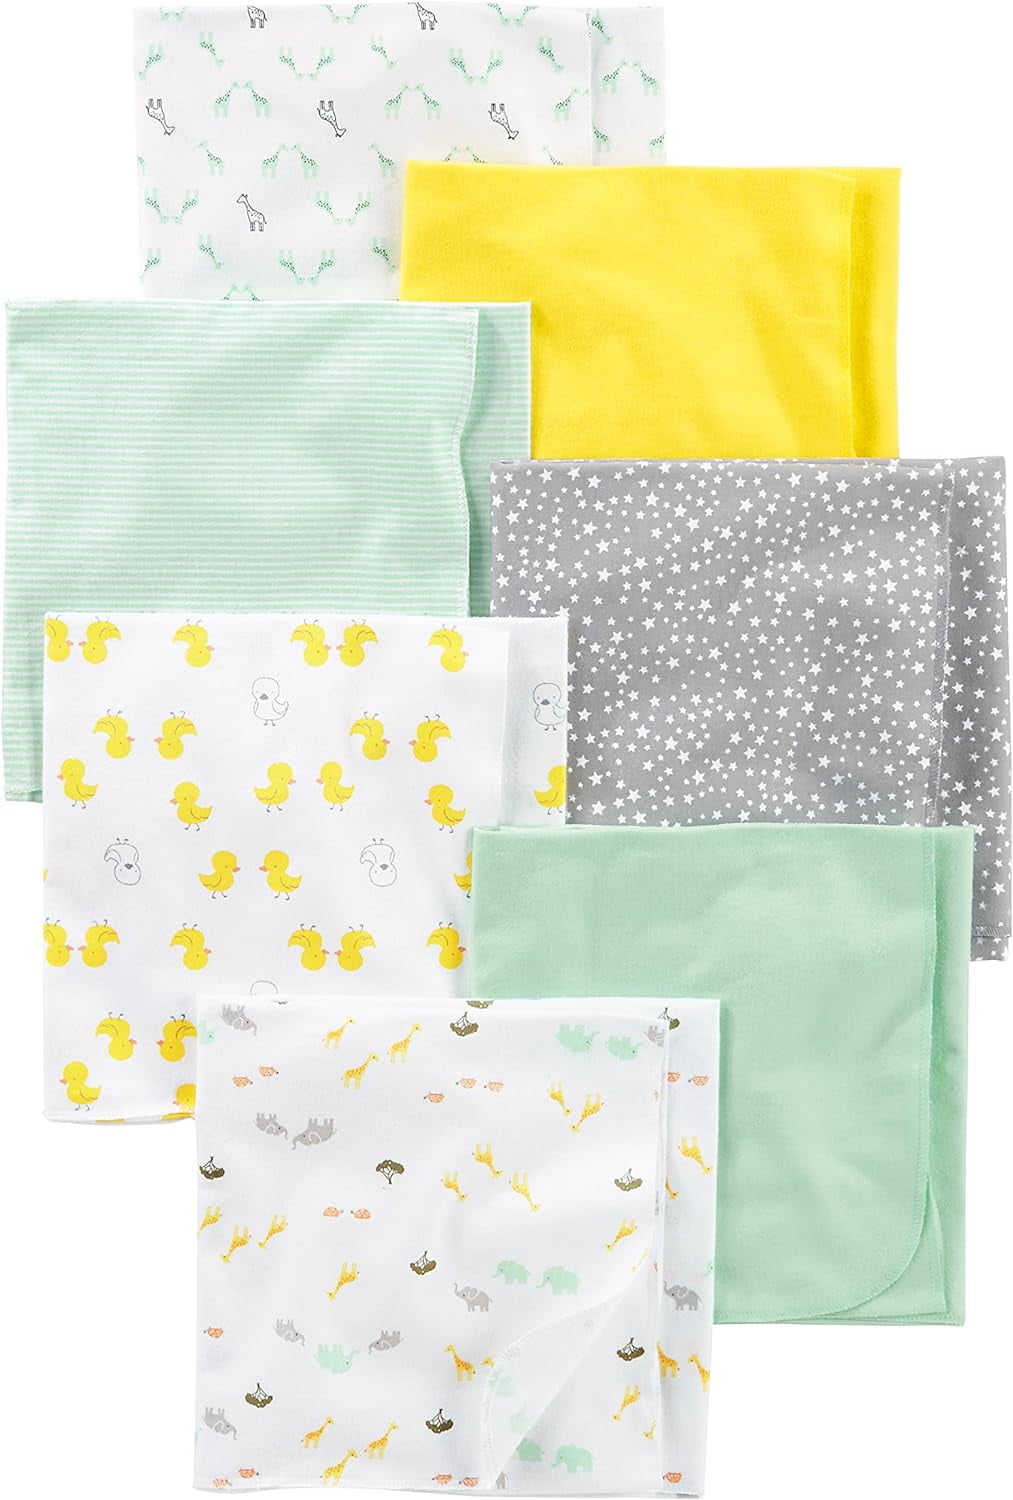 Simple Joys by Carter's Unisex Babies' Muslin burp cloths, Pack of 7,  Grey/White/Mint Green, One Size 